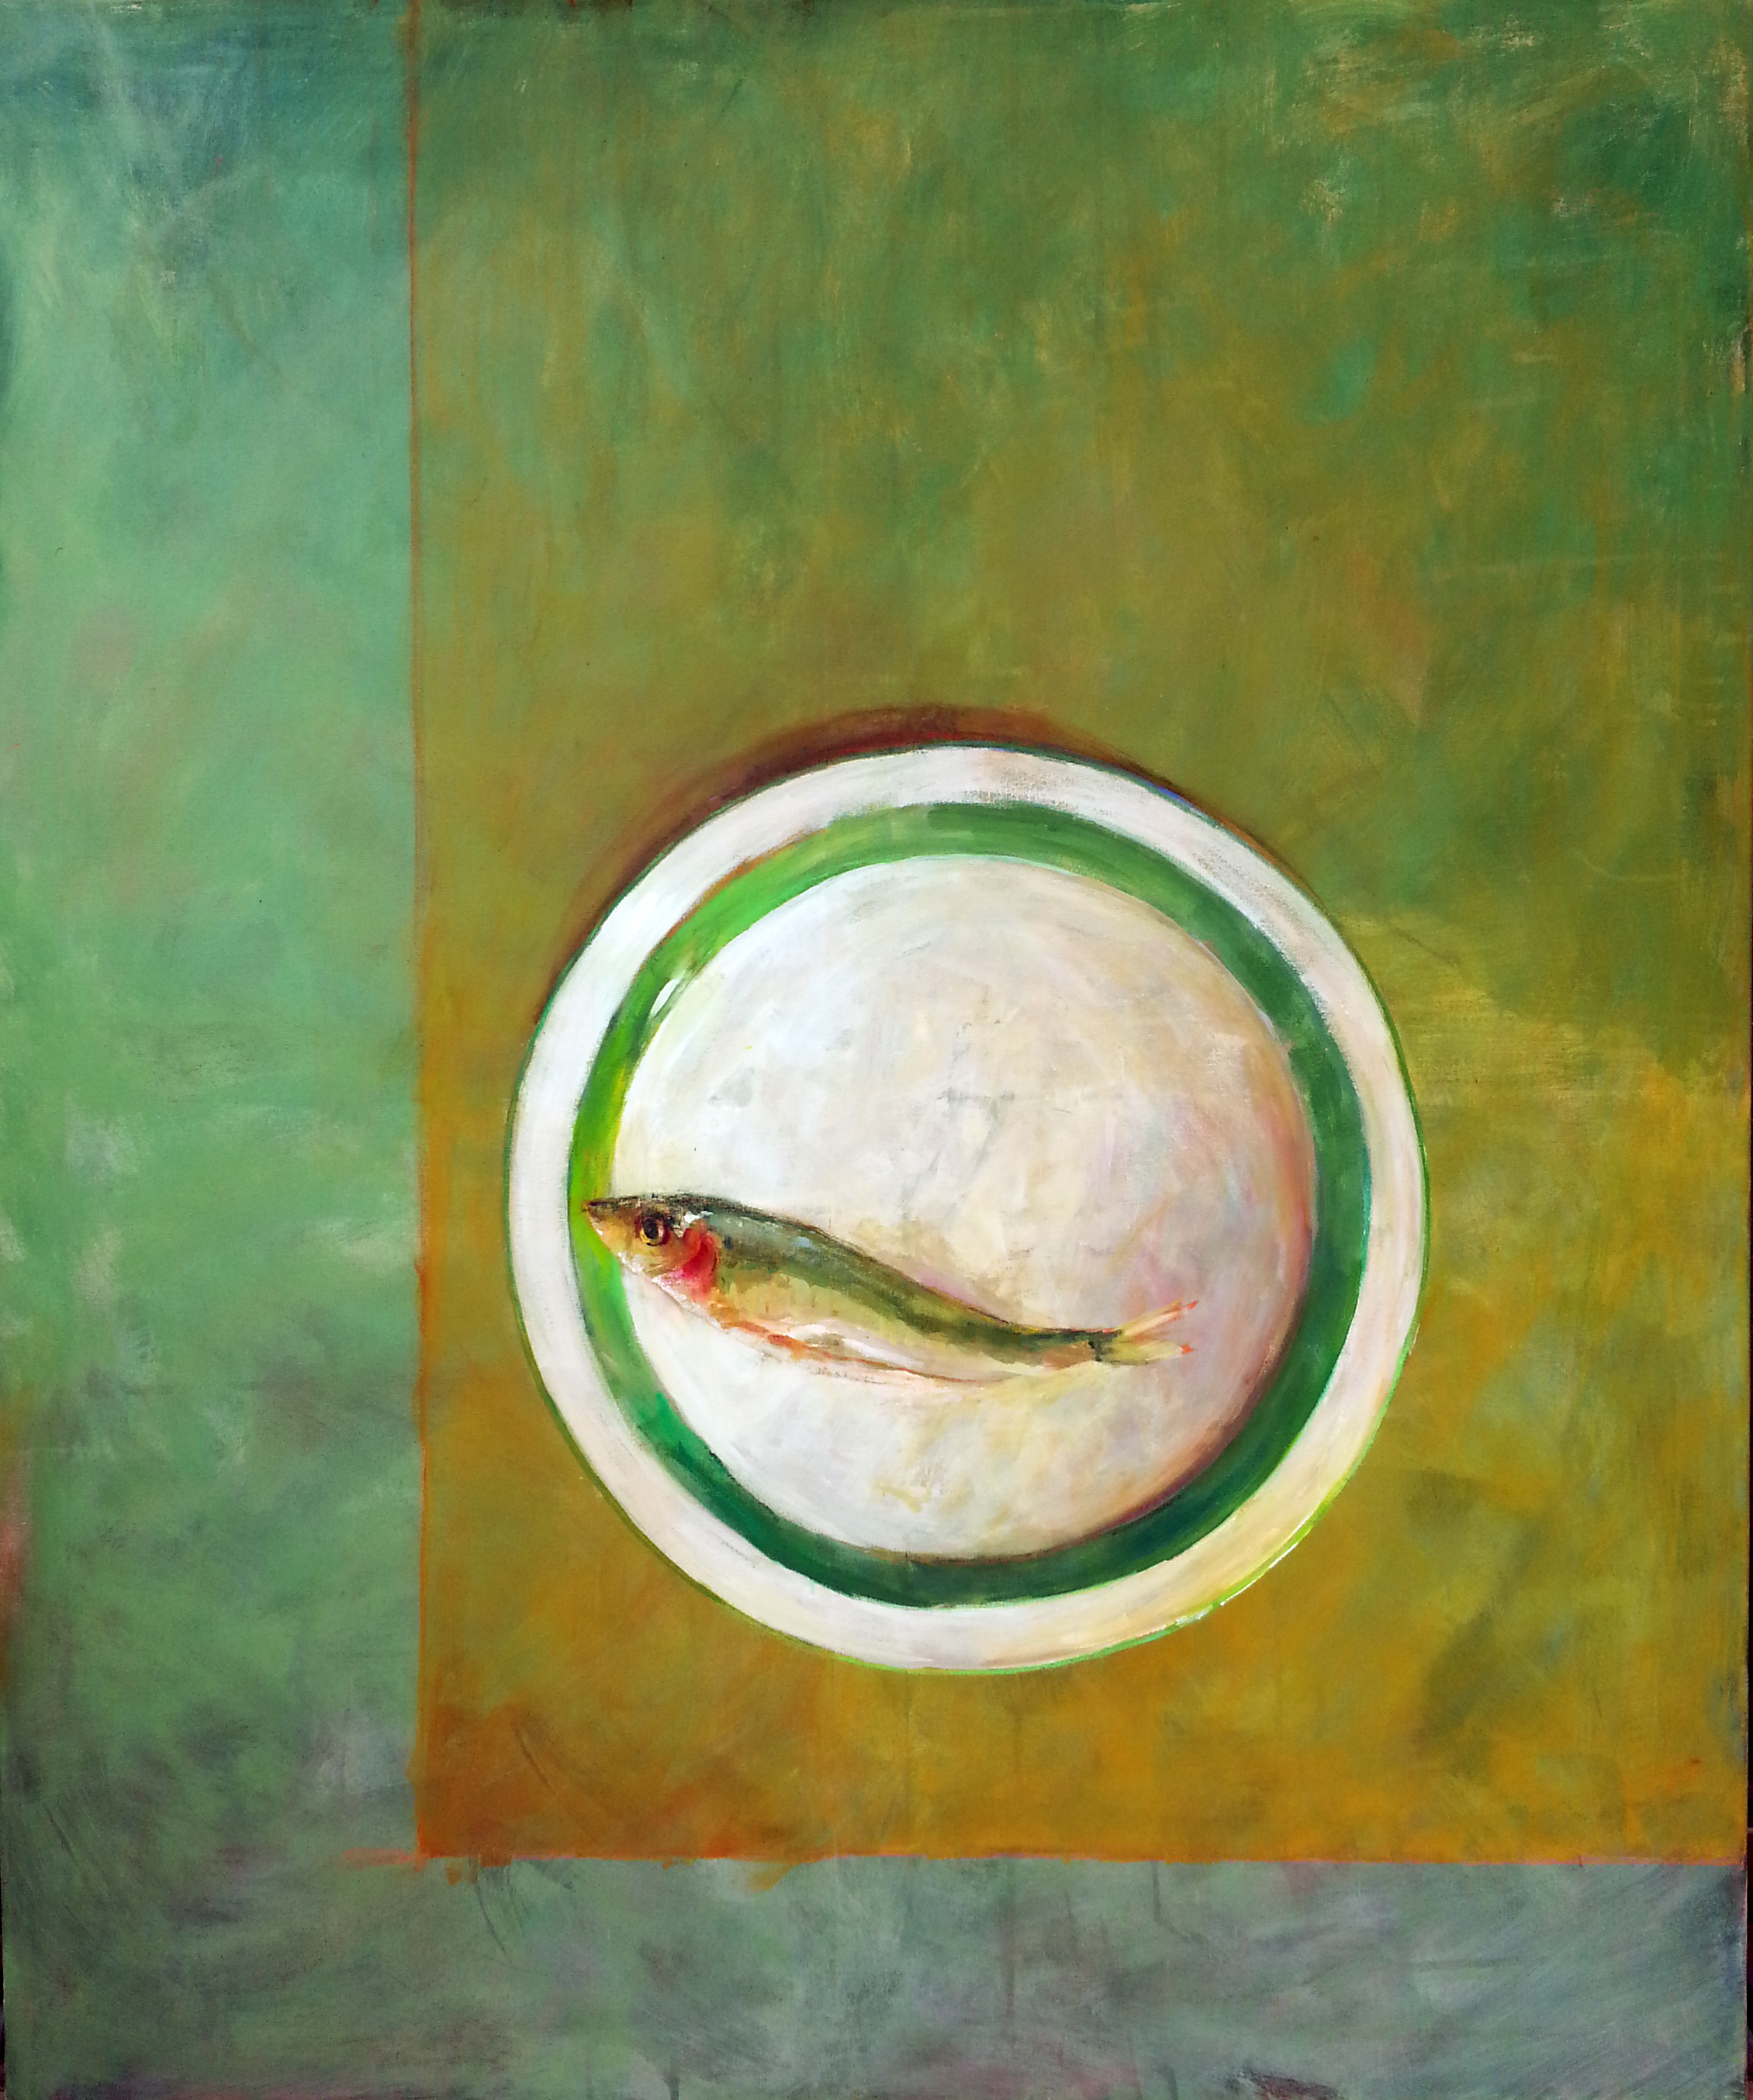 Sardine on a white plate with green band 